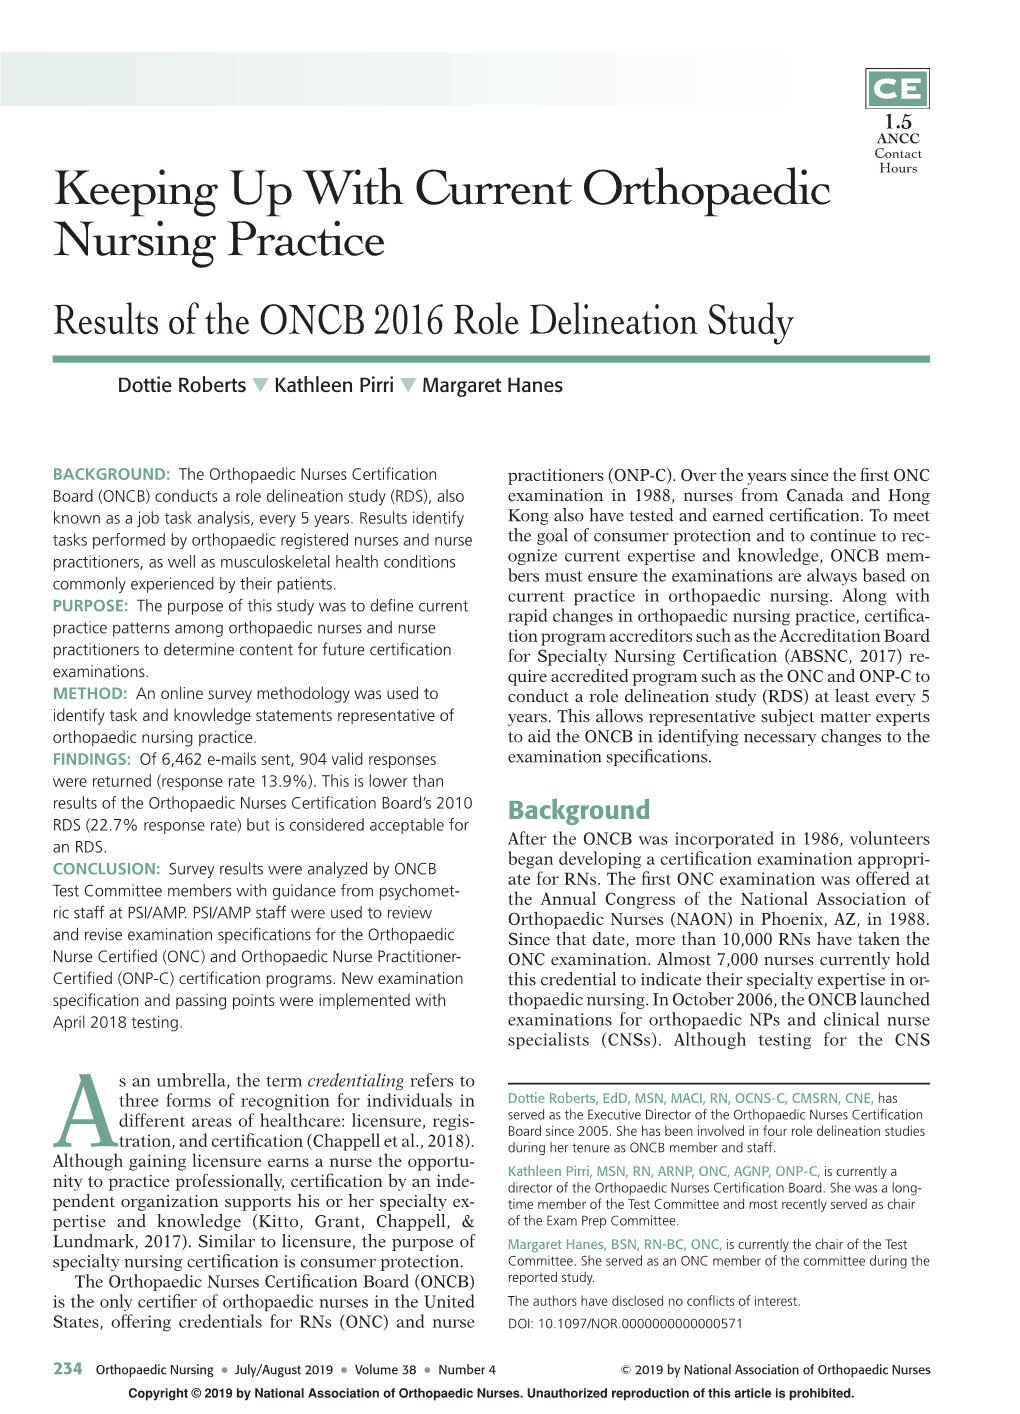 Keeping up with Current Orthopaedic Nursing Practice